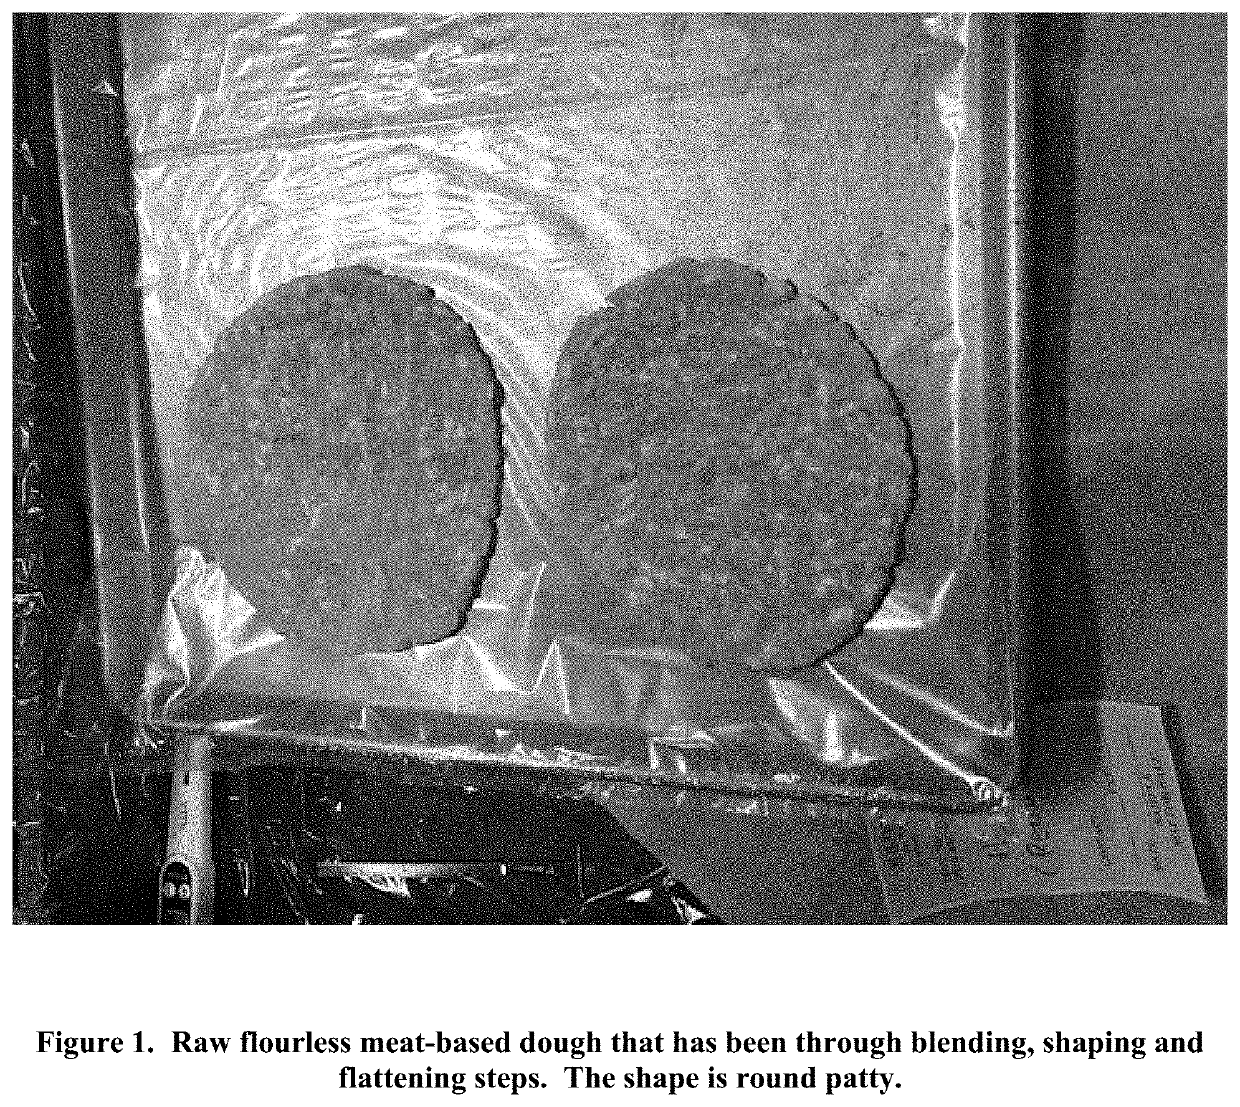 Flourless baked products and methods of preparation